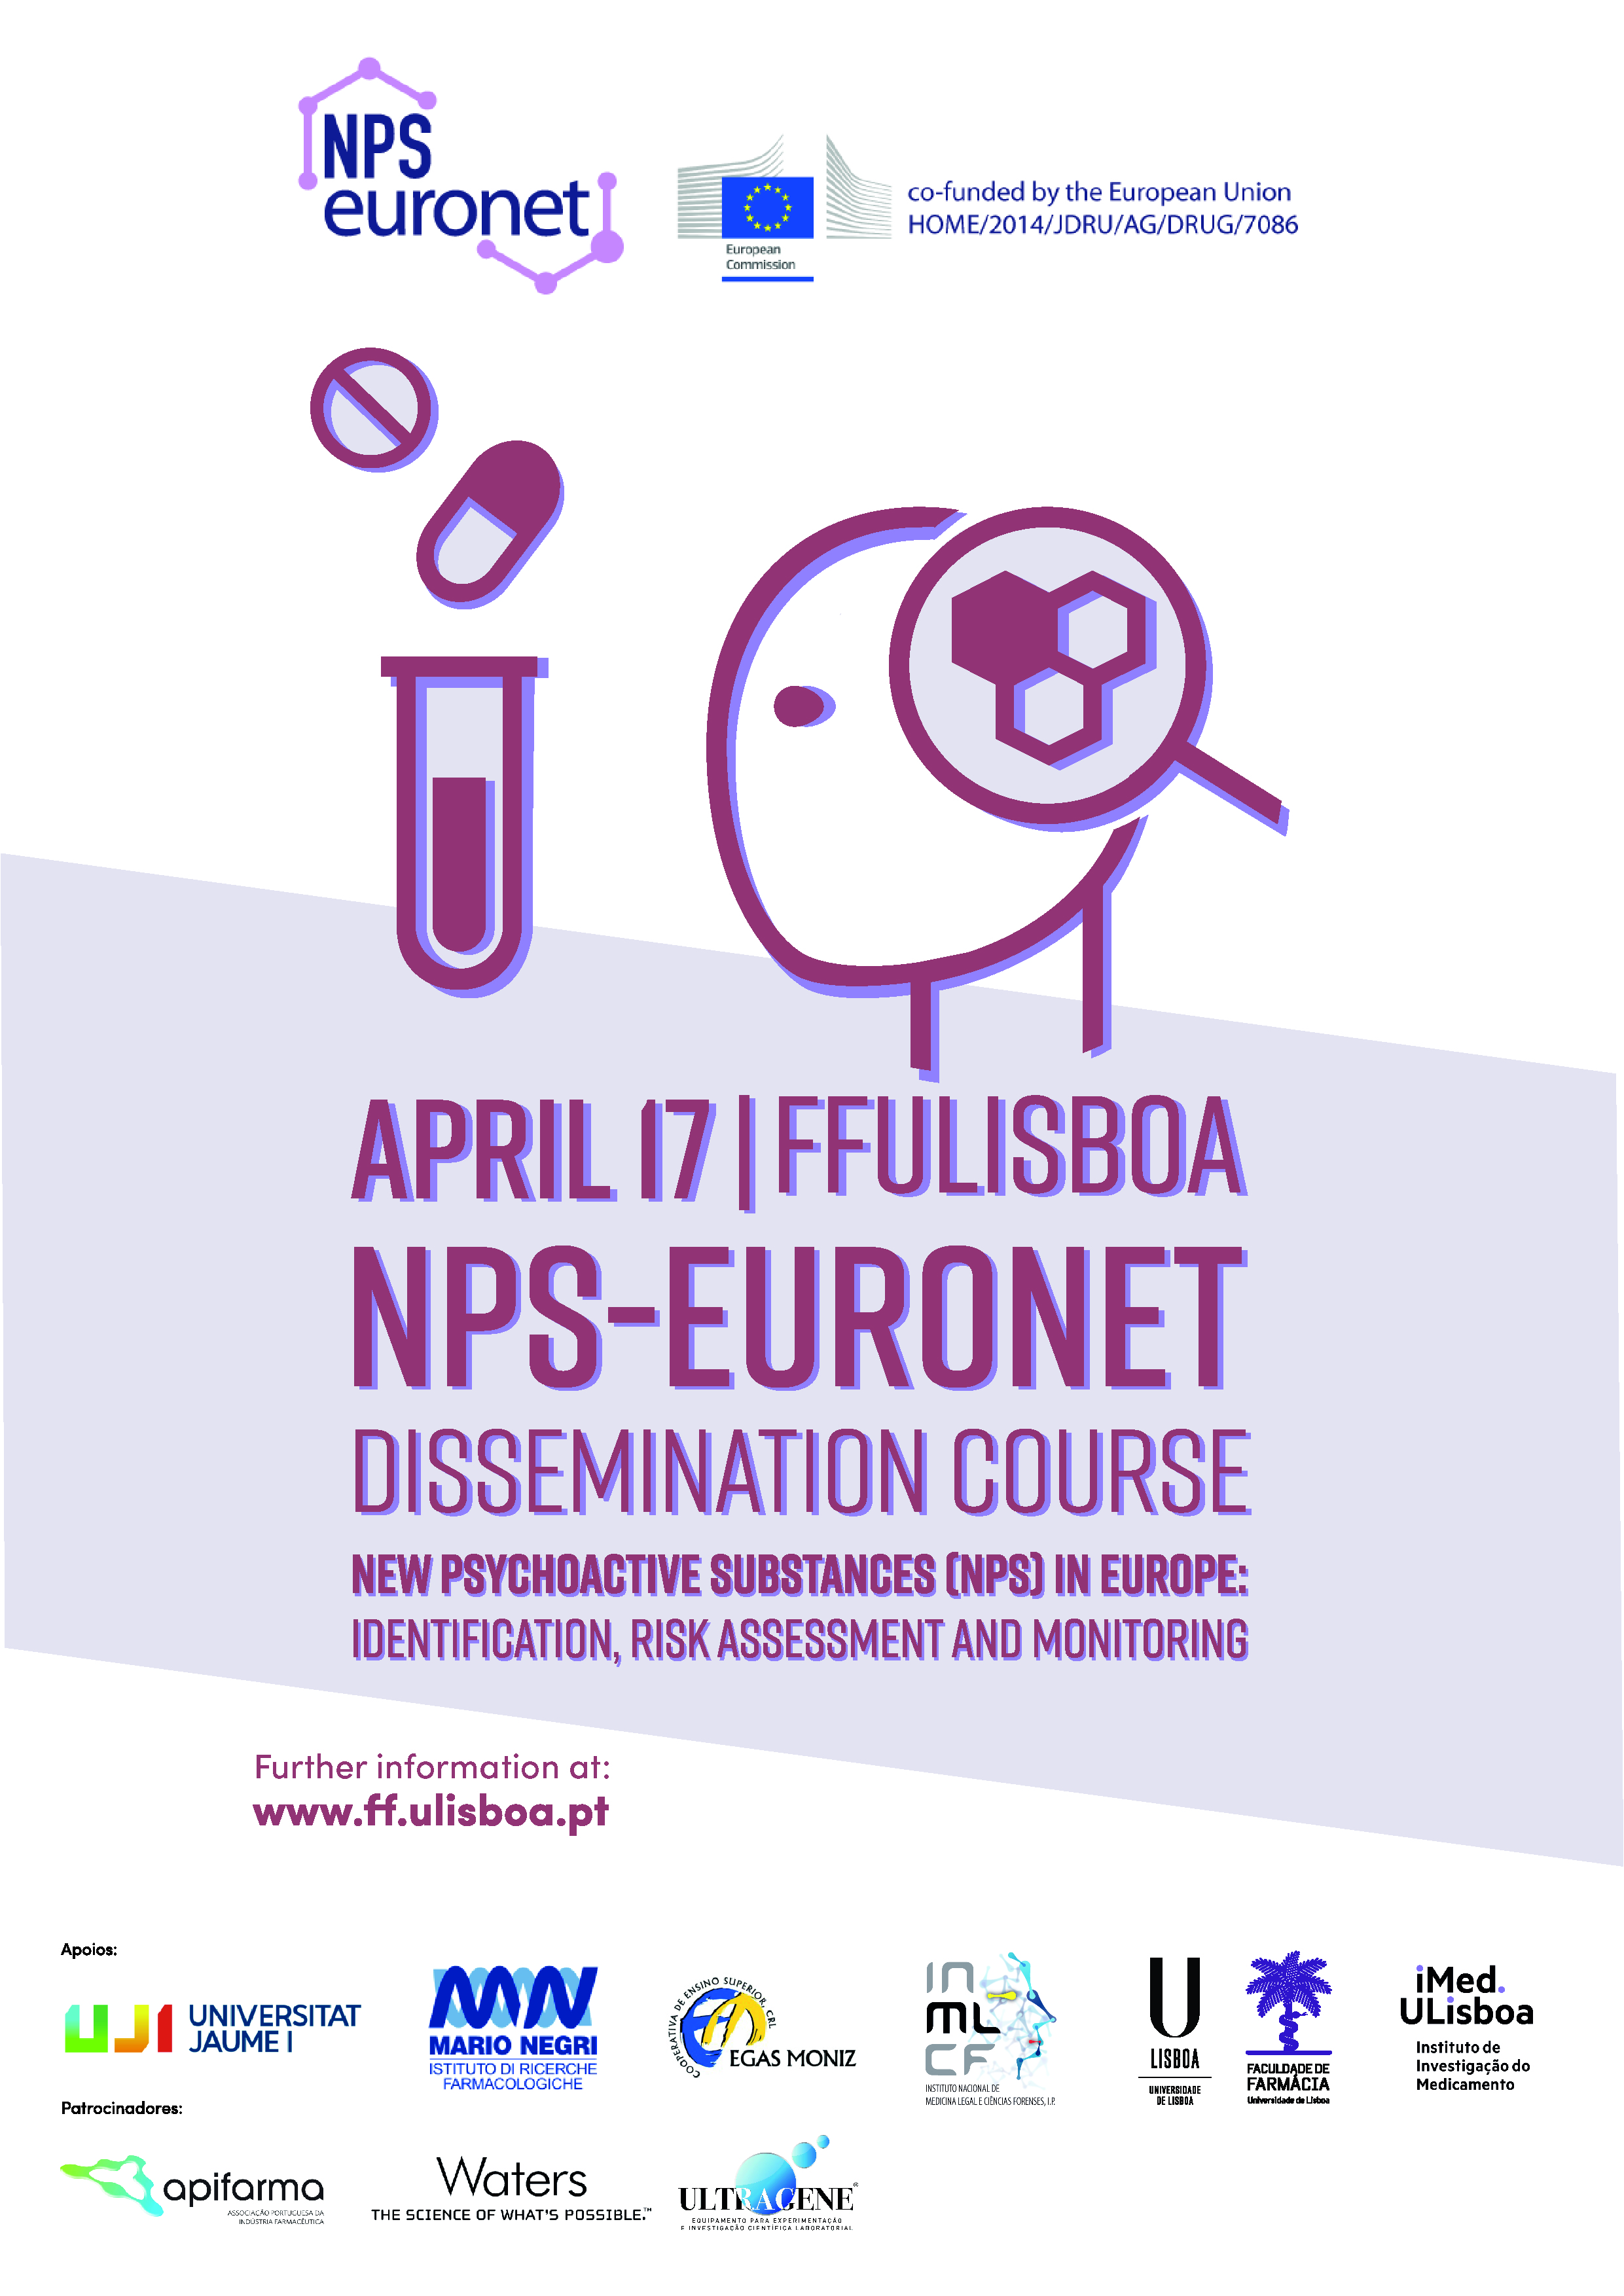 NPS-EURONET Dissemination Course “New psychoactive substances (NPS) in Europe: identification, risk assessment and monitoring”